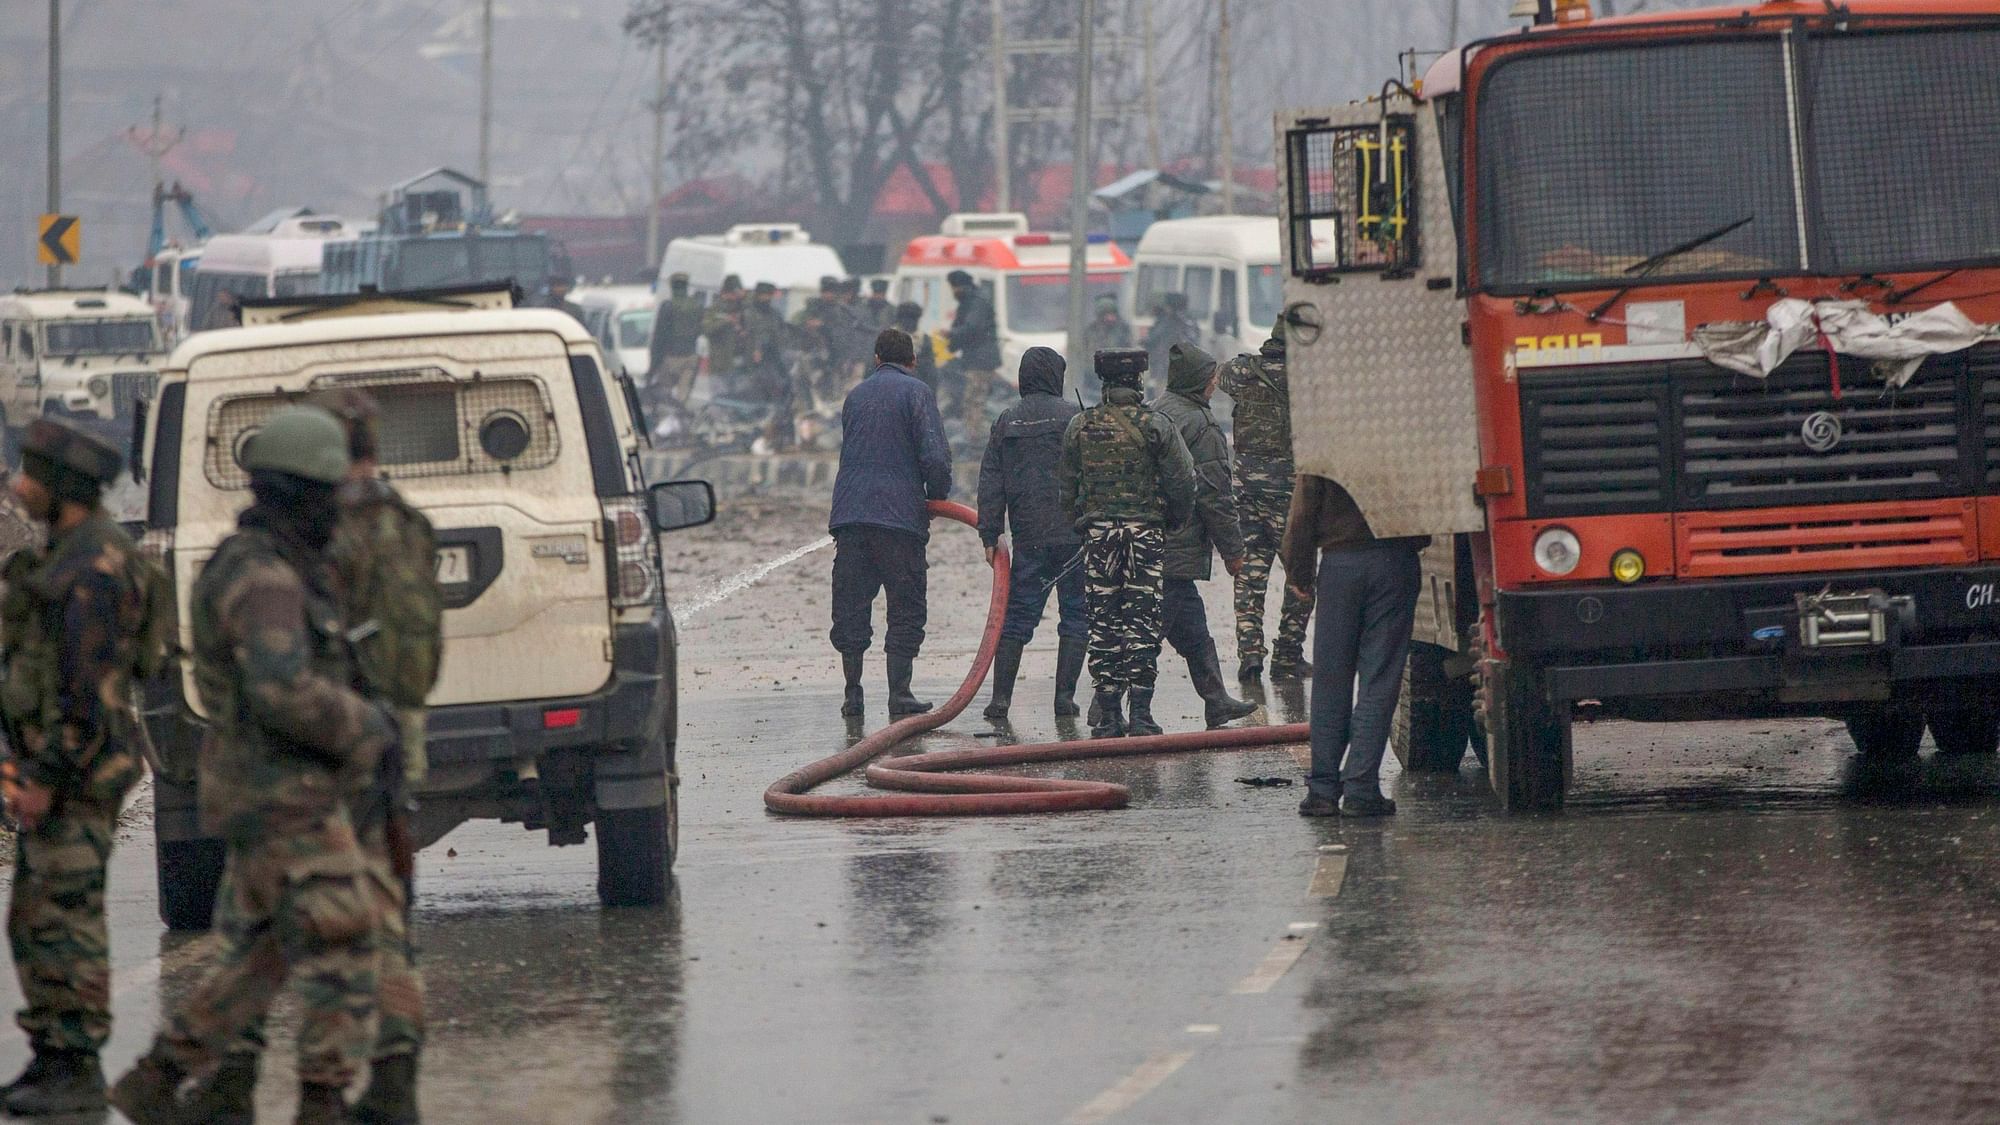 At least 40 CRPF personnel were killed in Jammu and Kashmir on Thursday, 14 February.